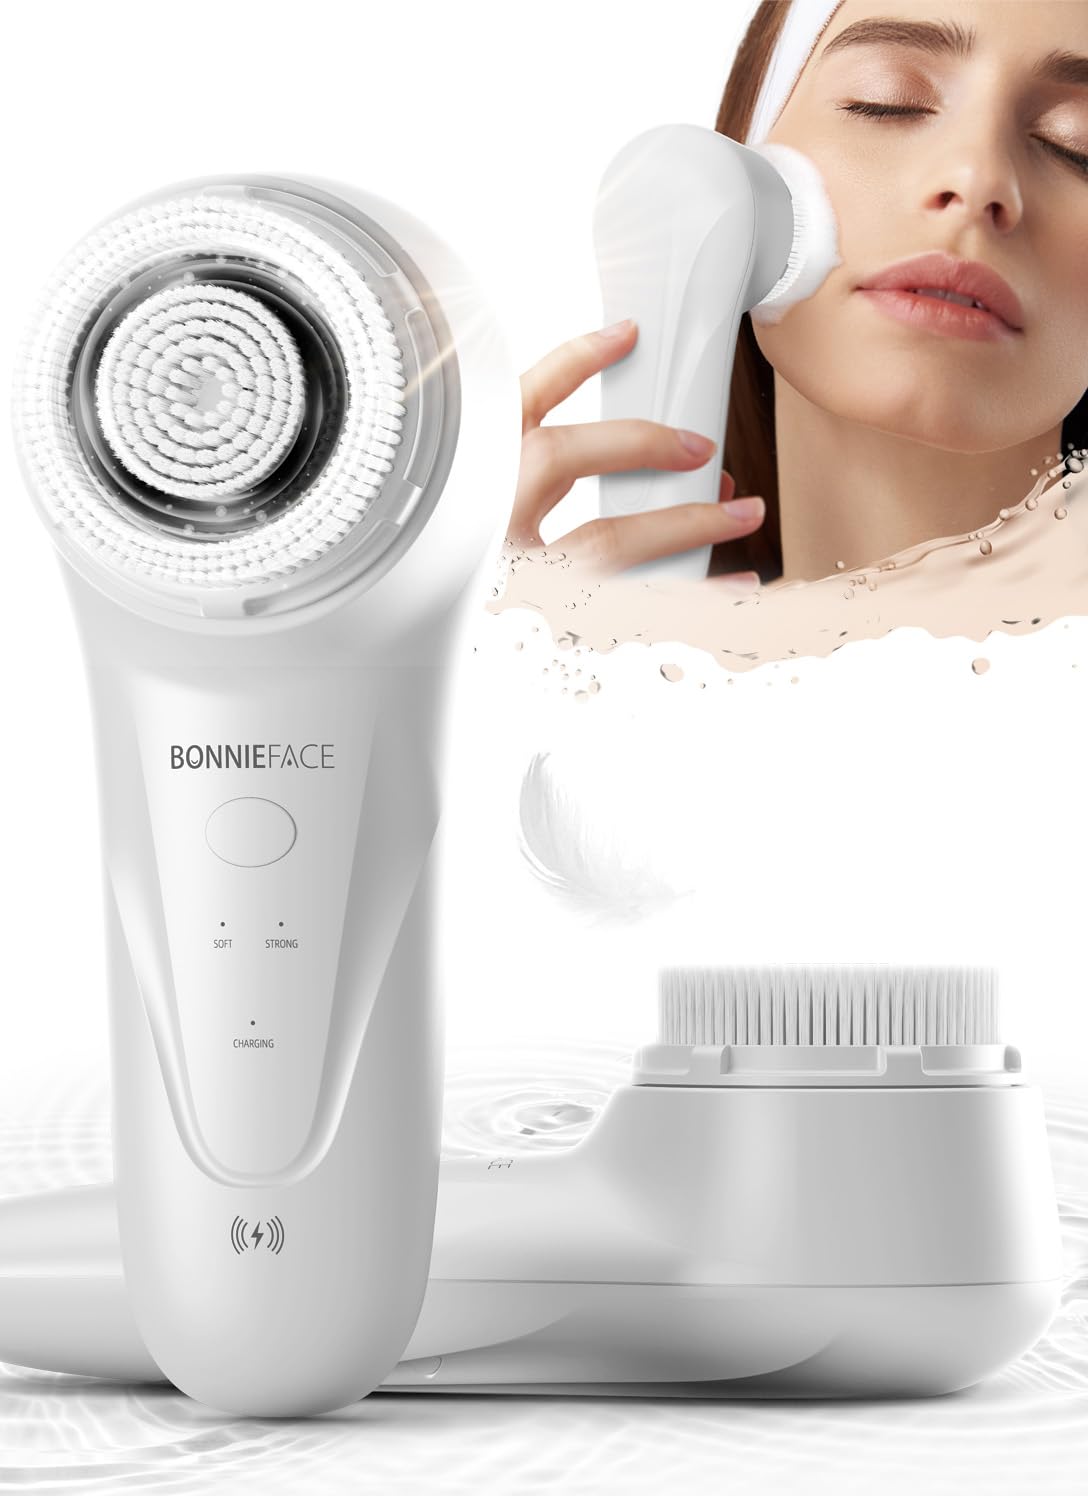 BONNIEFACE Sonic Facial Cleansing Brush, Waterproof Face Scrubber for Deep Cleansing, Super Acoustic Vibration Face Wash Brush for Skin Care, Creative Wireless Charging Face Brush Cleanser